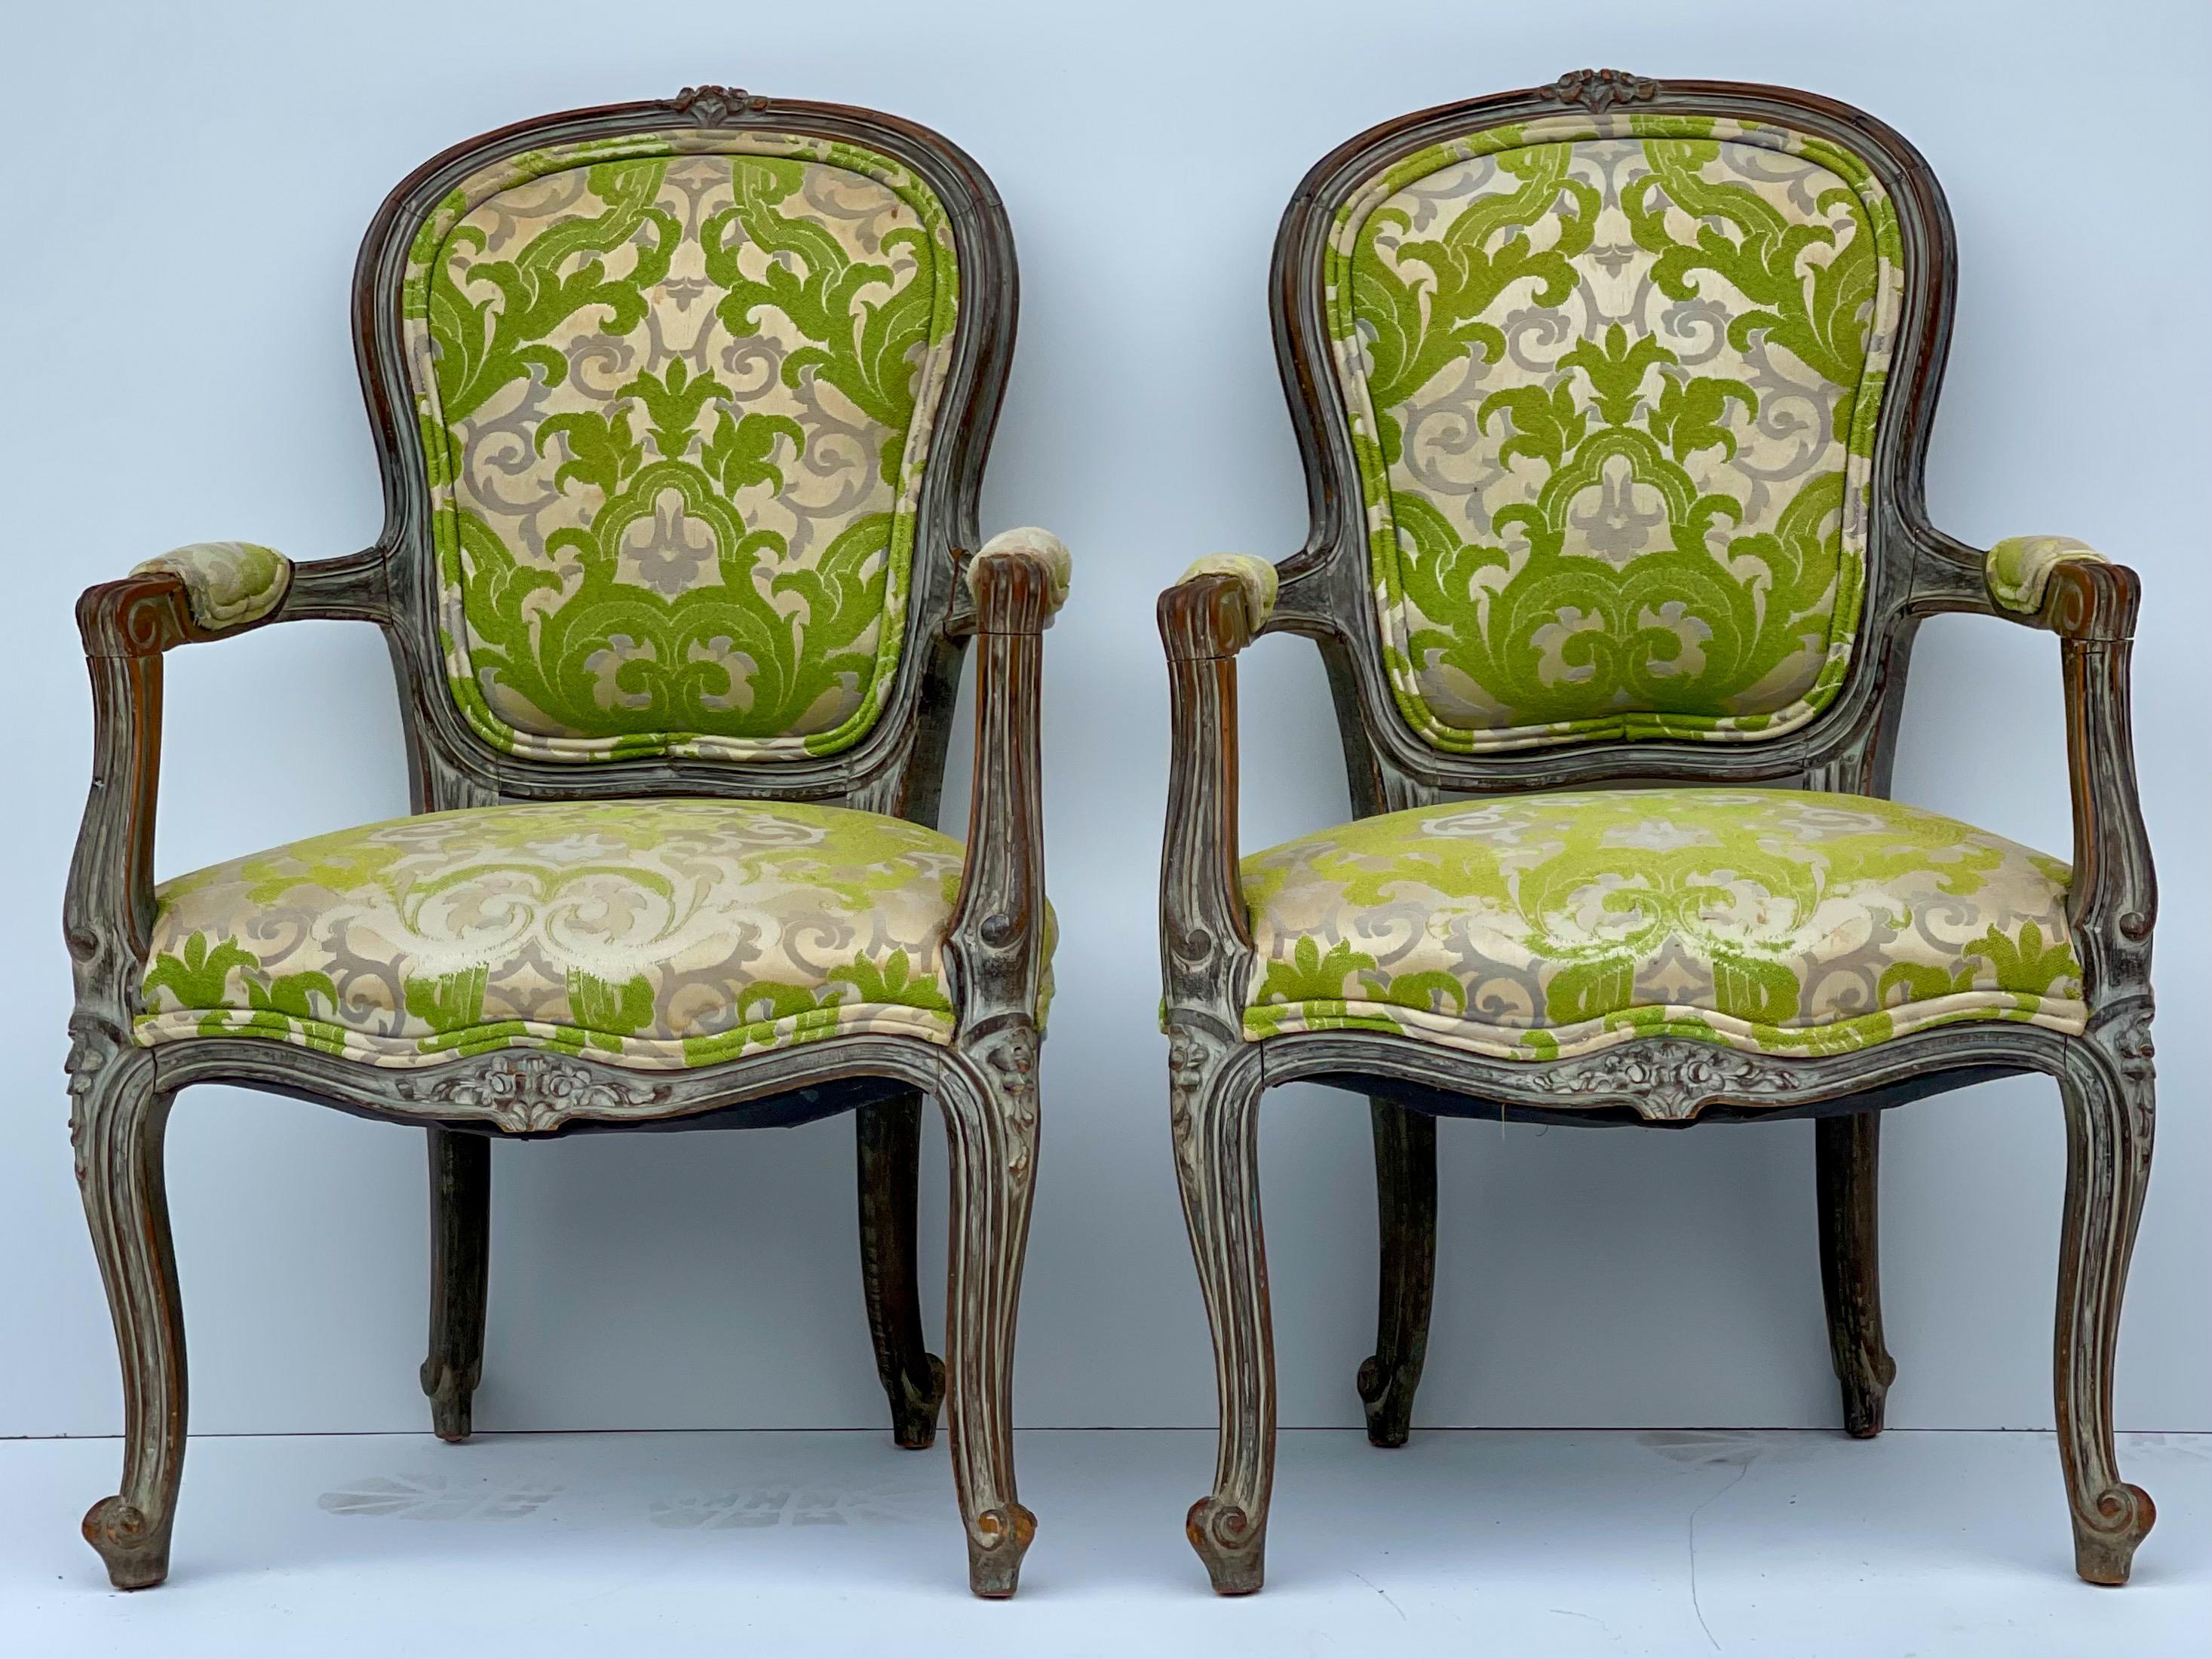 Early French Louis XVI Style Child’s Chairs in Chartreuse Damask, Pair For Sale 2